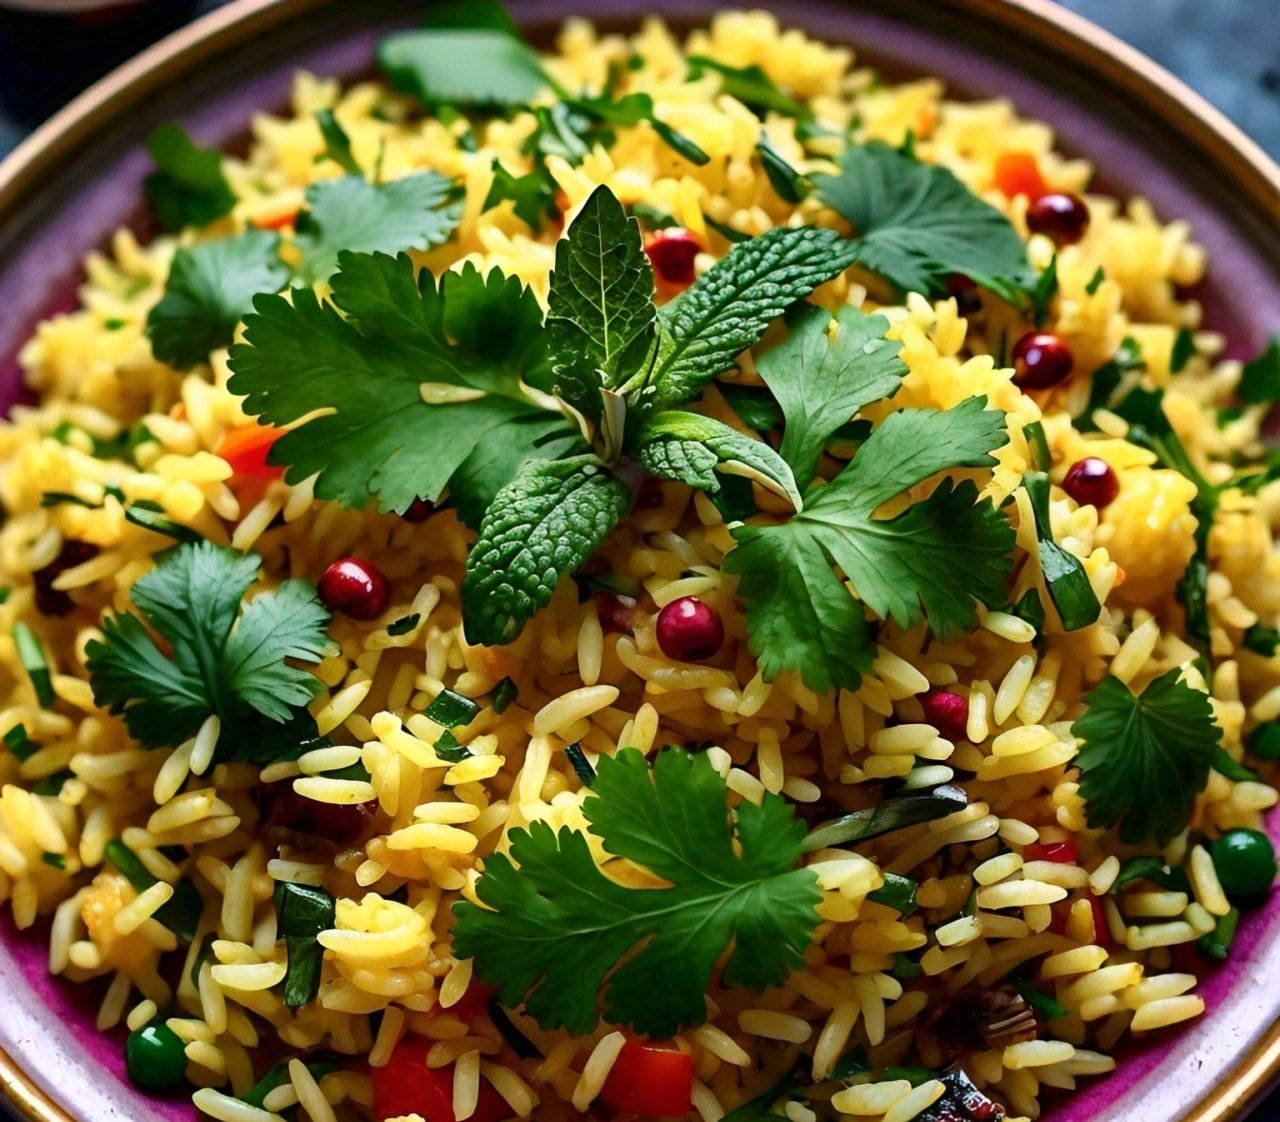 Delicious Herbed Rice Recipe: Flavorful, Easy, and Ready in 20 Minutes